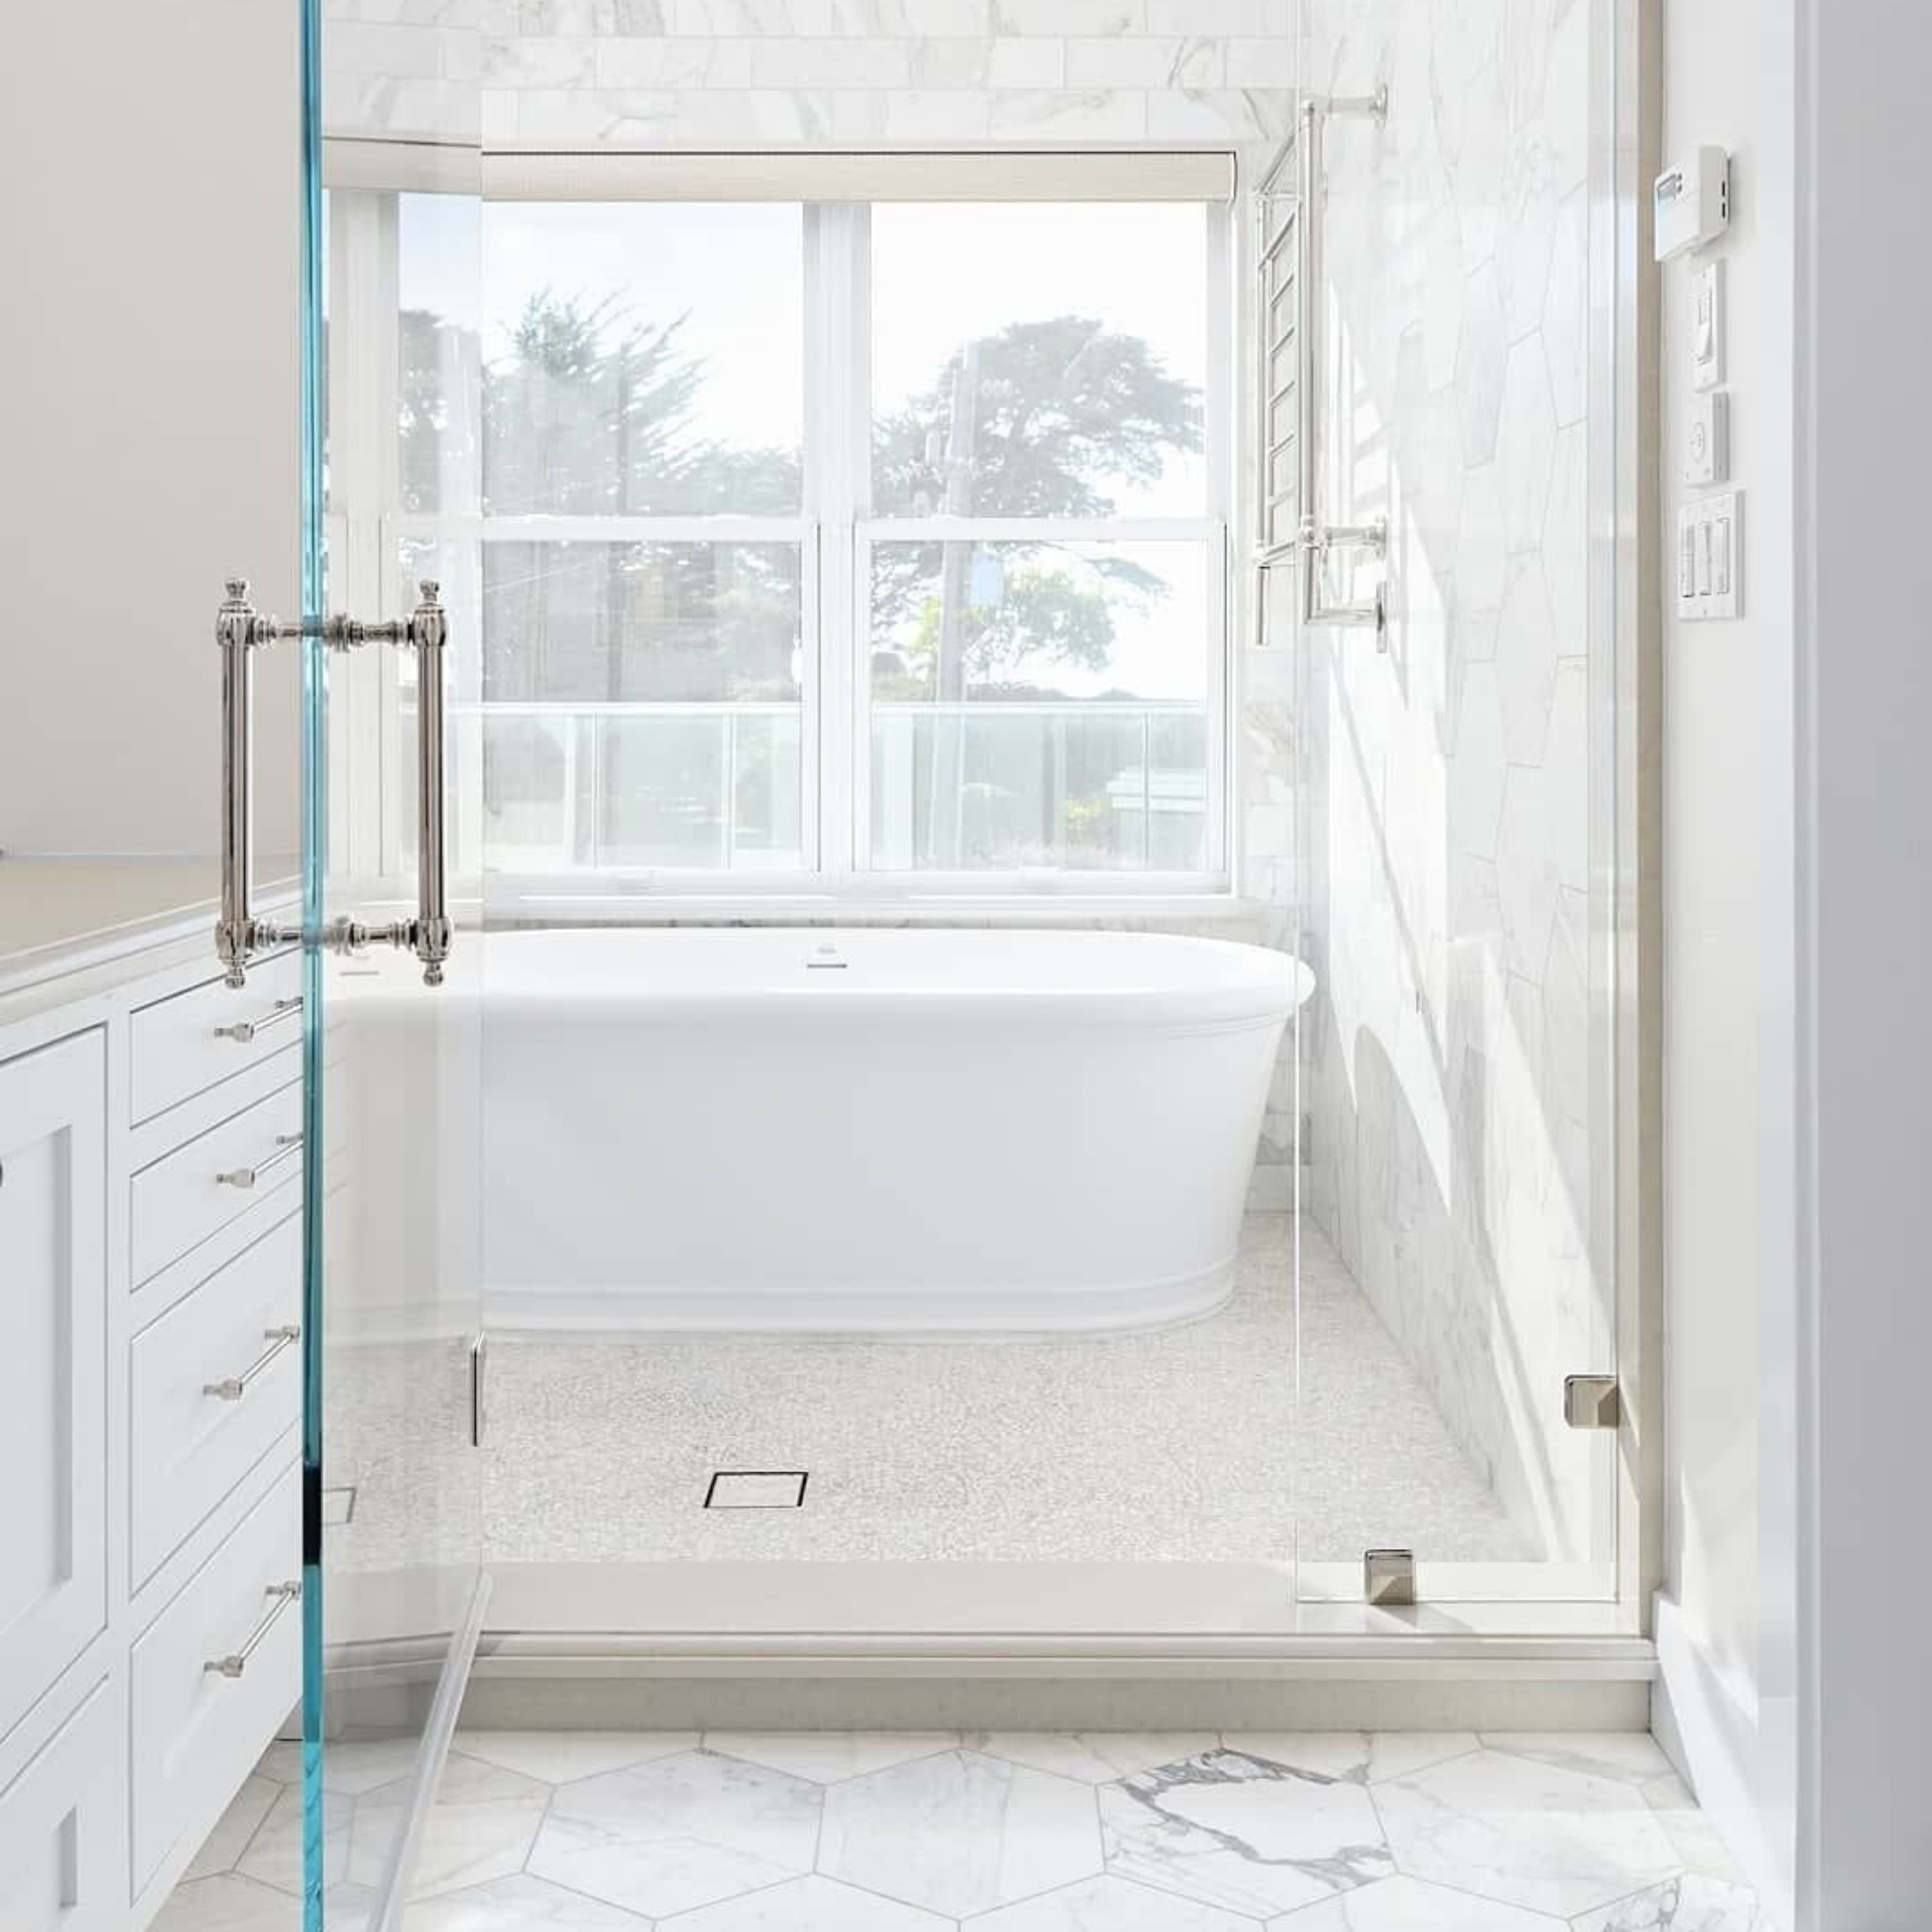 Calacatta 4x8 Polished Marble Tile shown with the Mother of Pearl Oyster White Tile in a bright bathroom. 